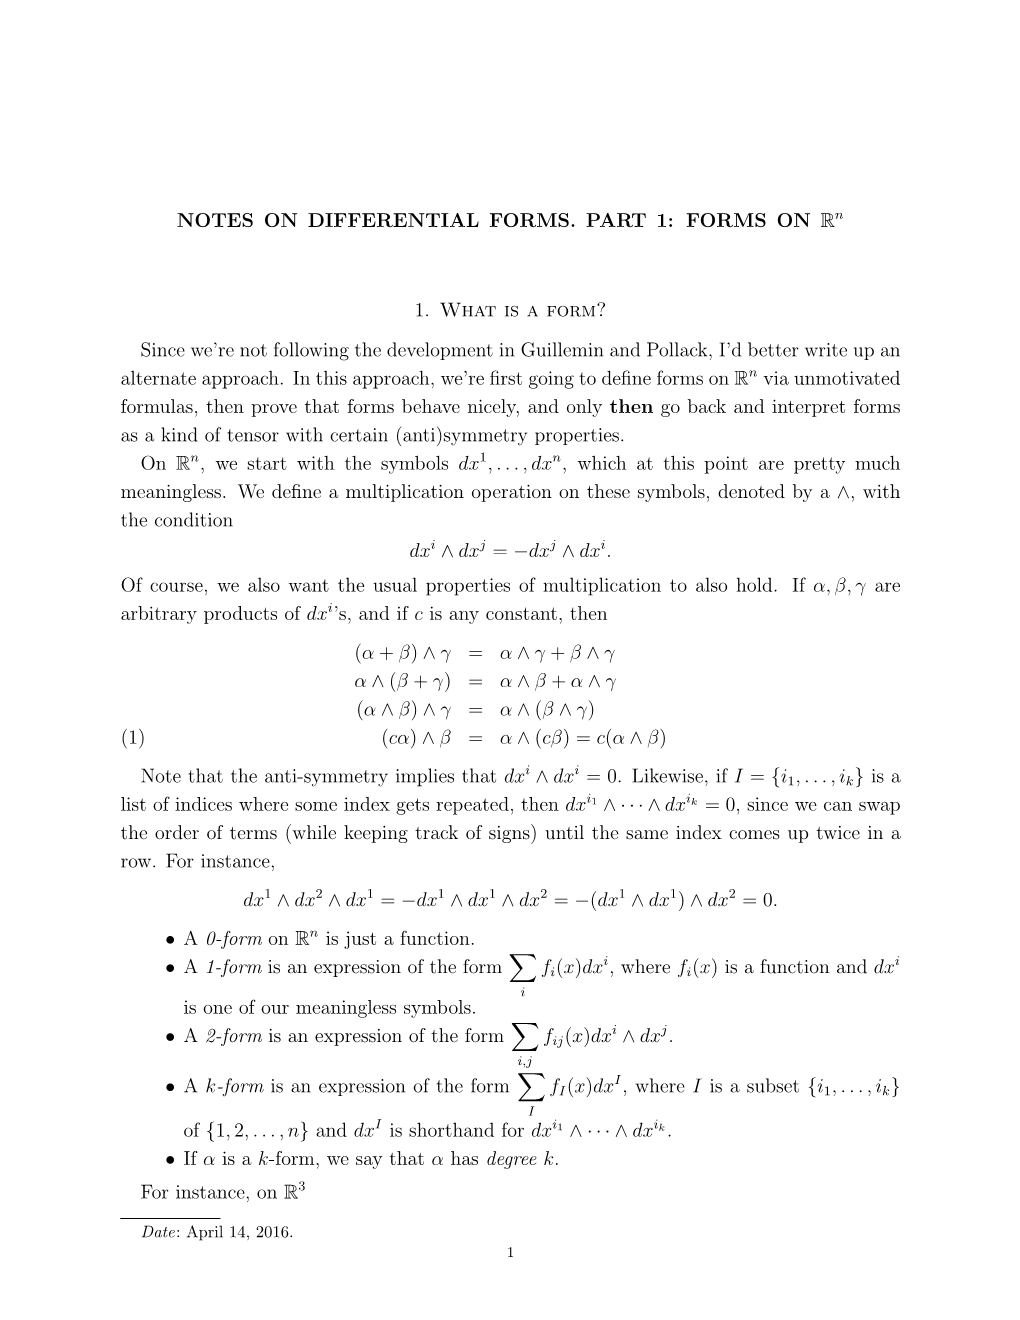 NOTES on DIFFERENTIAL FORMS. PART 1: FORMS on Rn